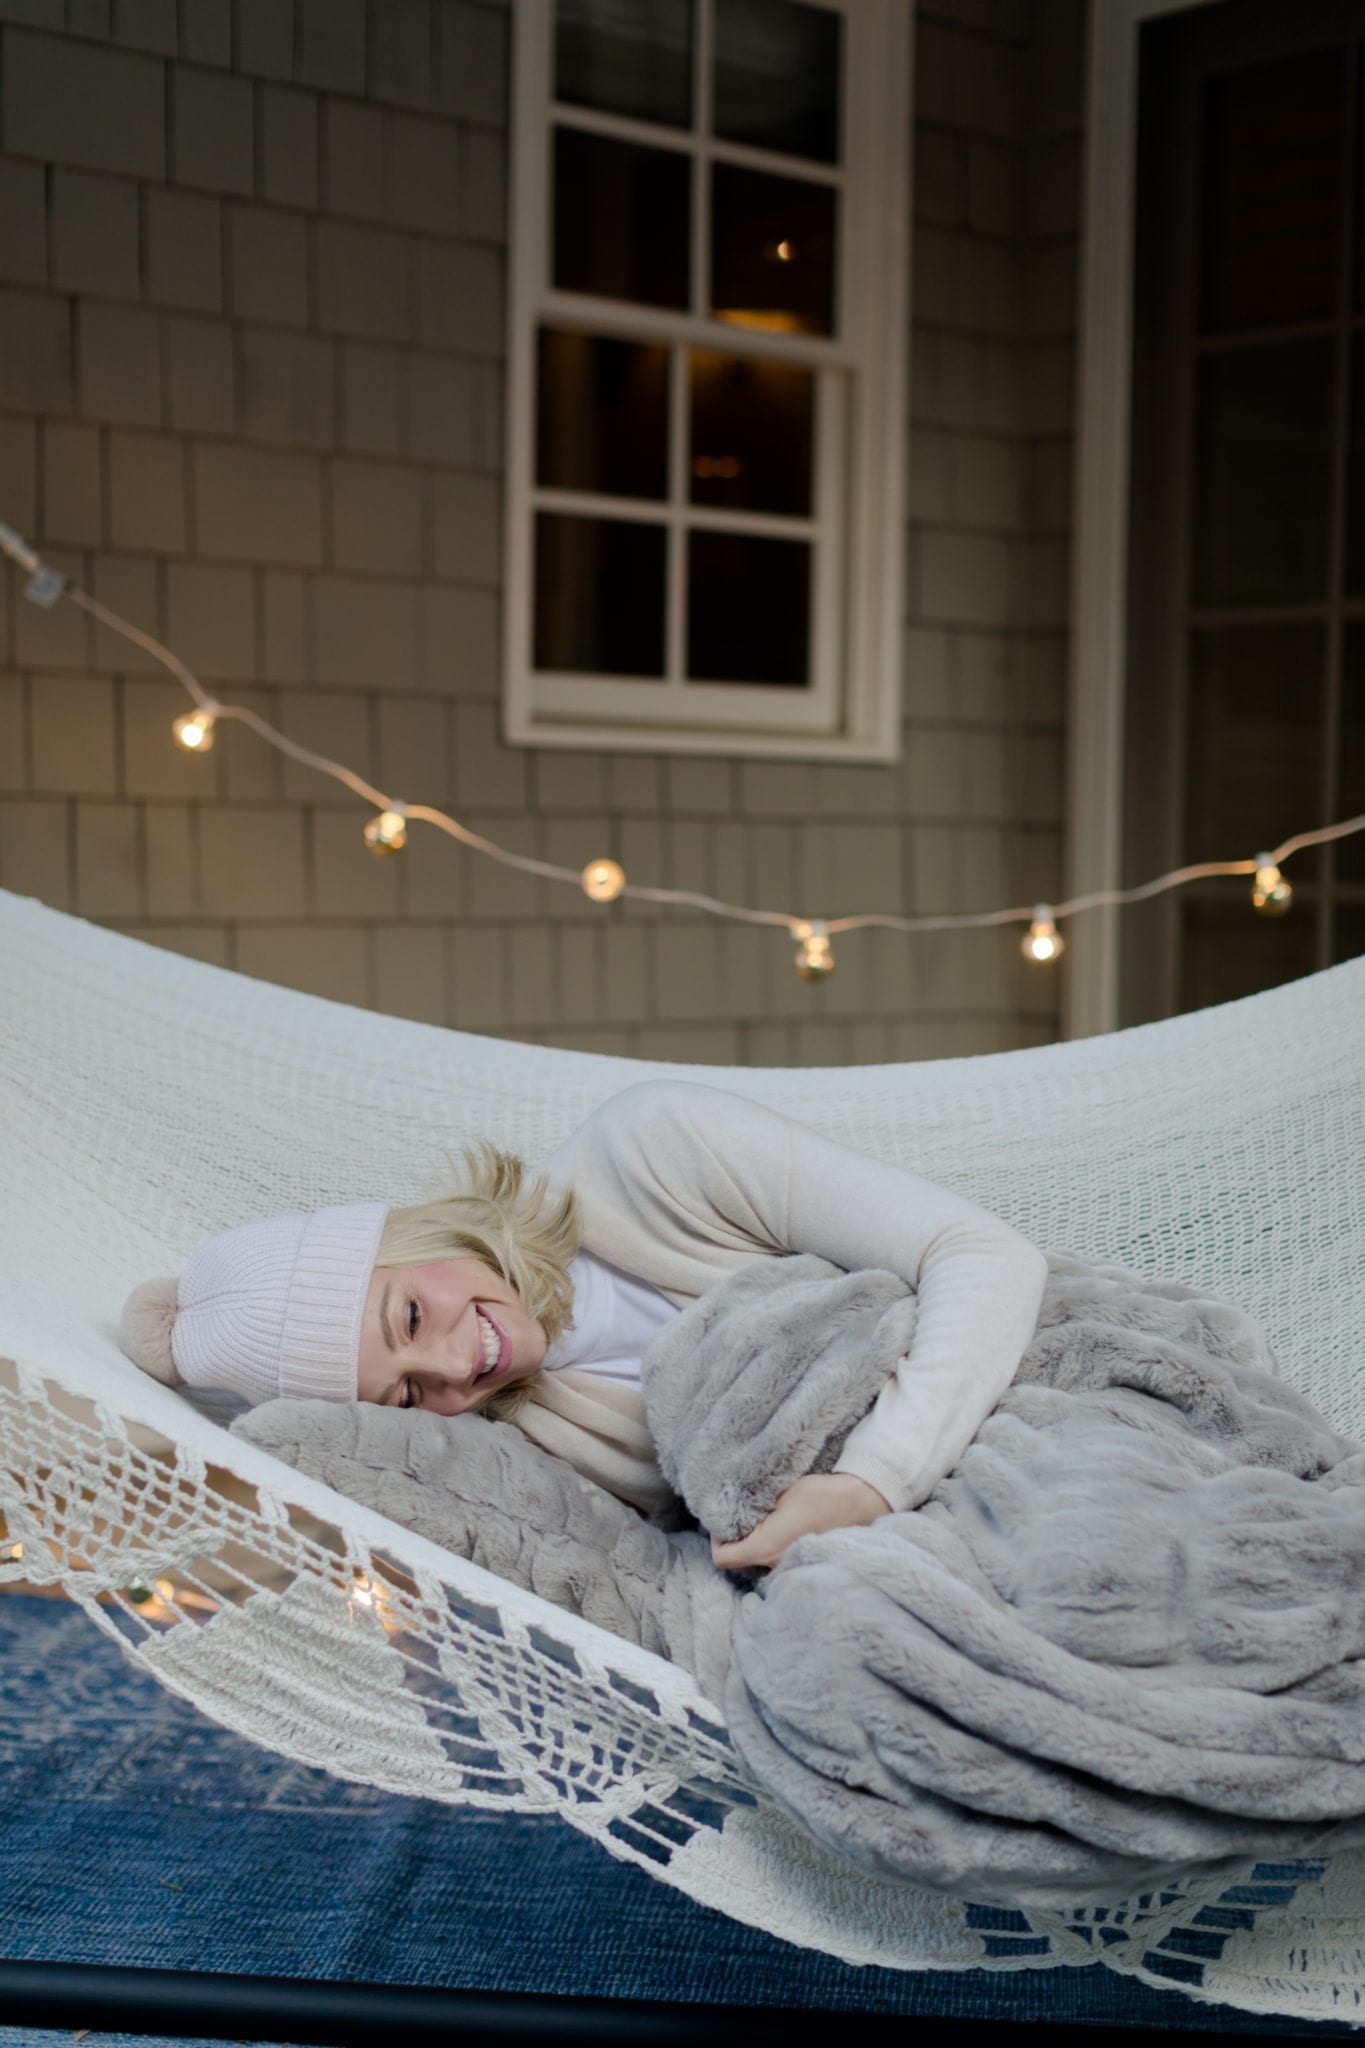 Fall home decor for outdoors. Outdoor hammock with soft pink beanie hat and cozy blanket.